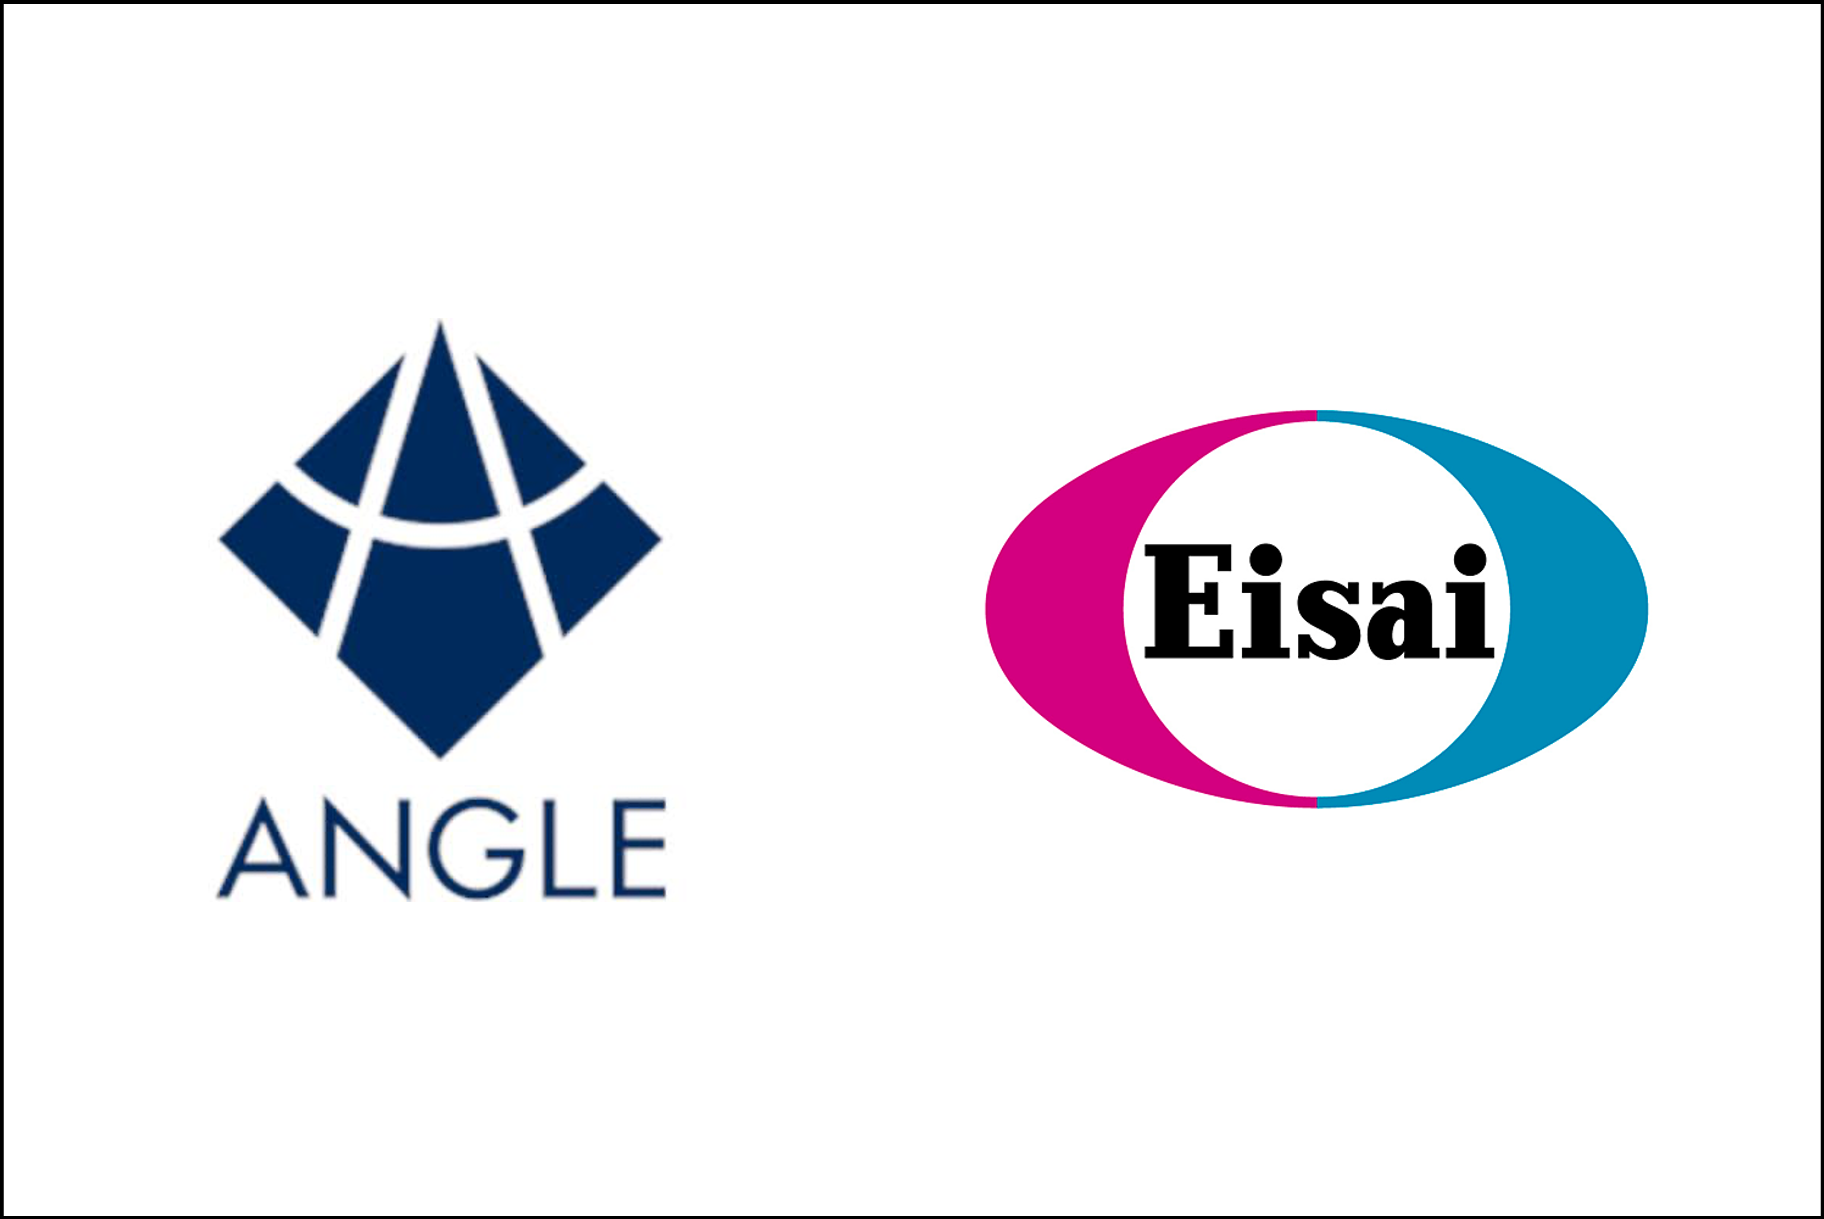 Angle, Eisai Agree to Study HER2 Assay